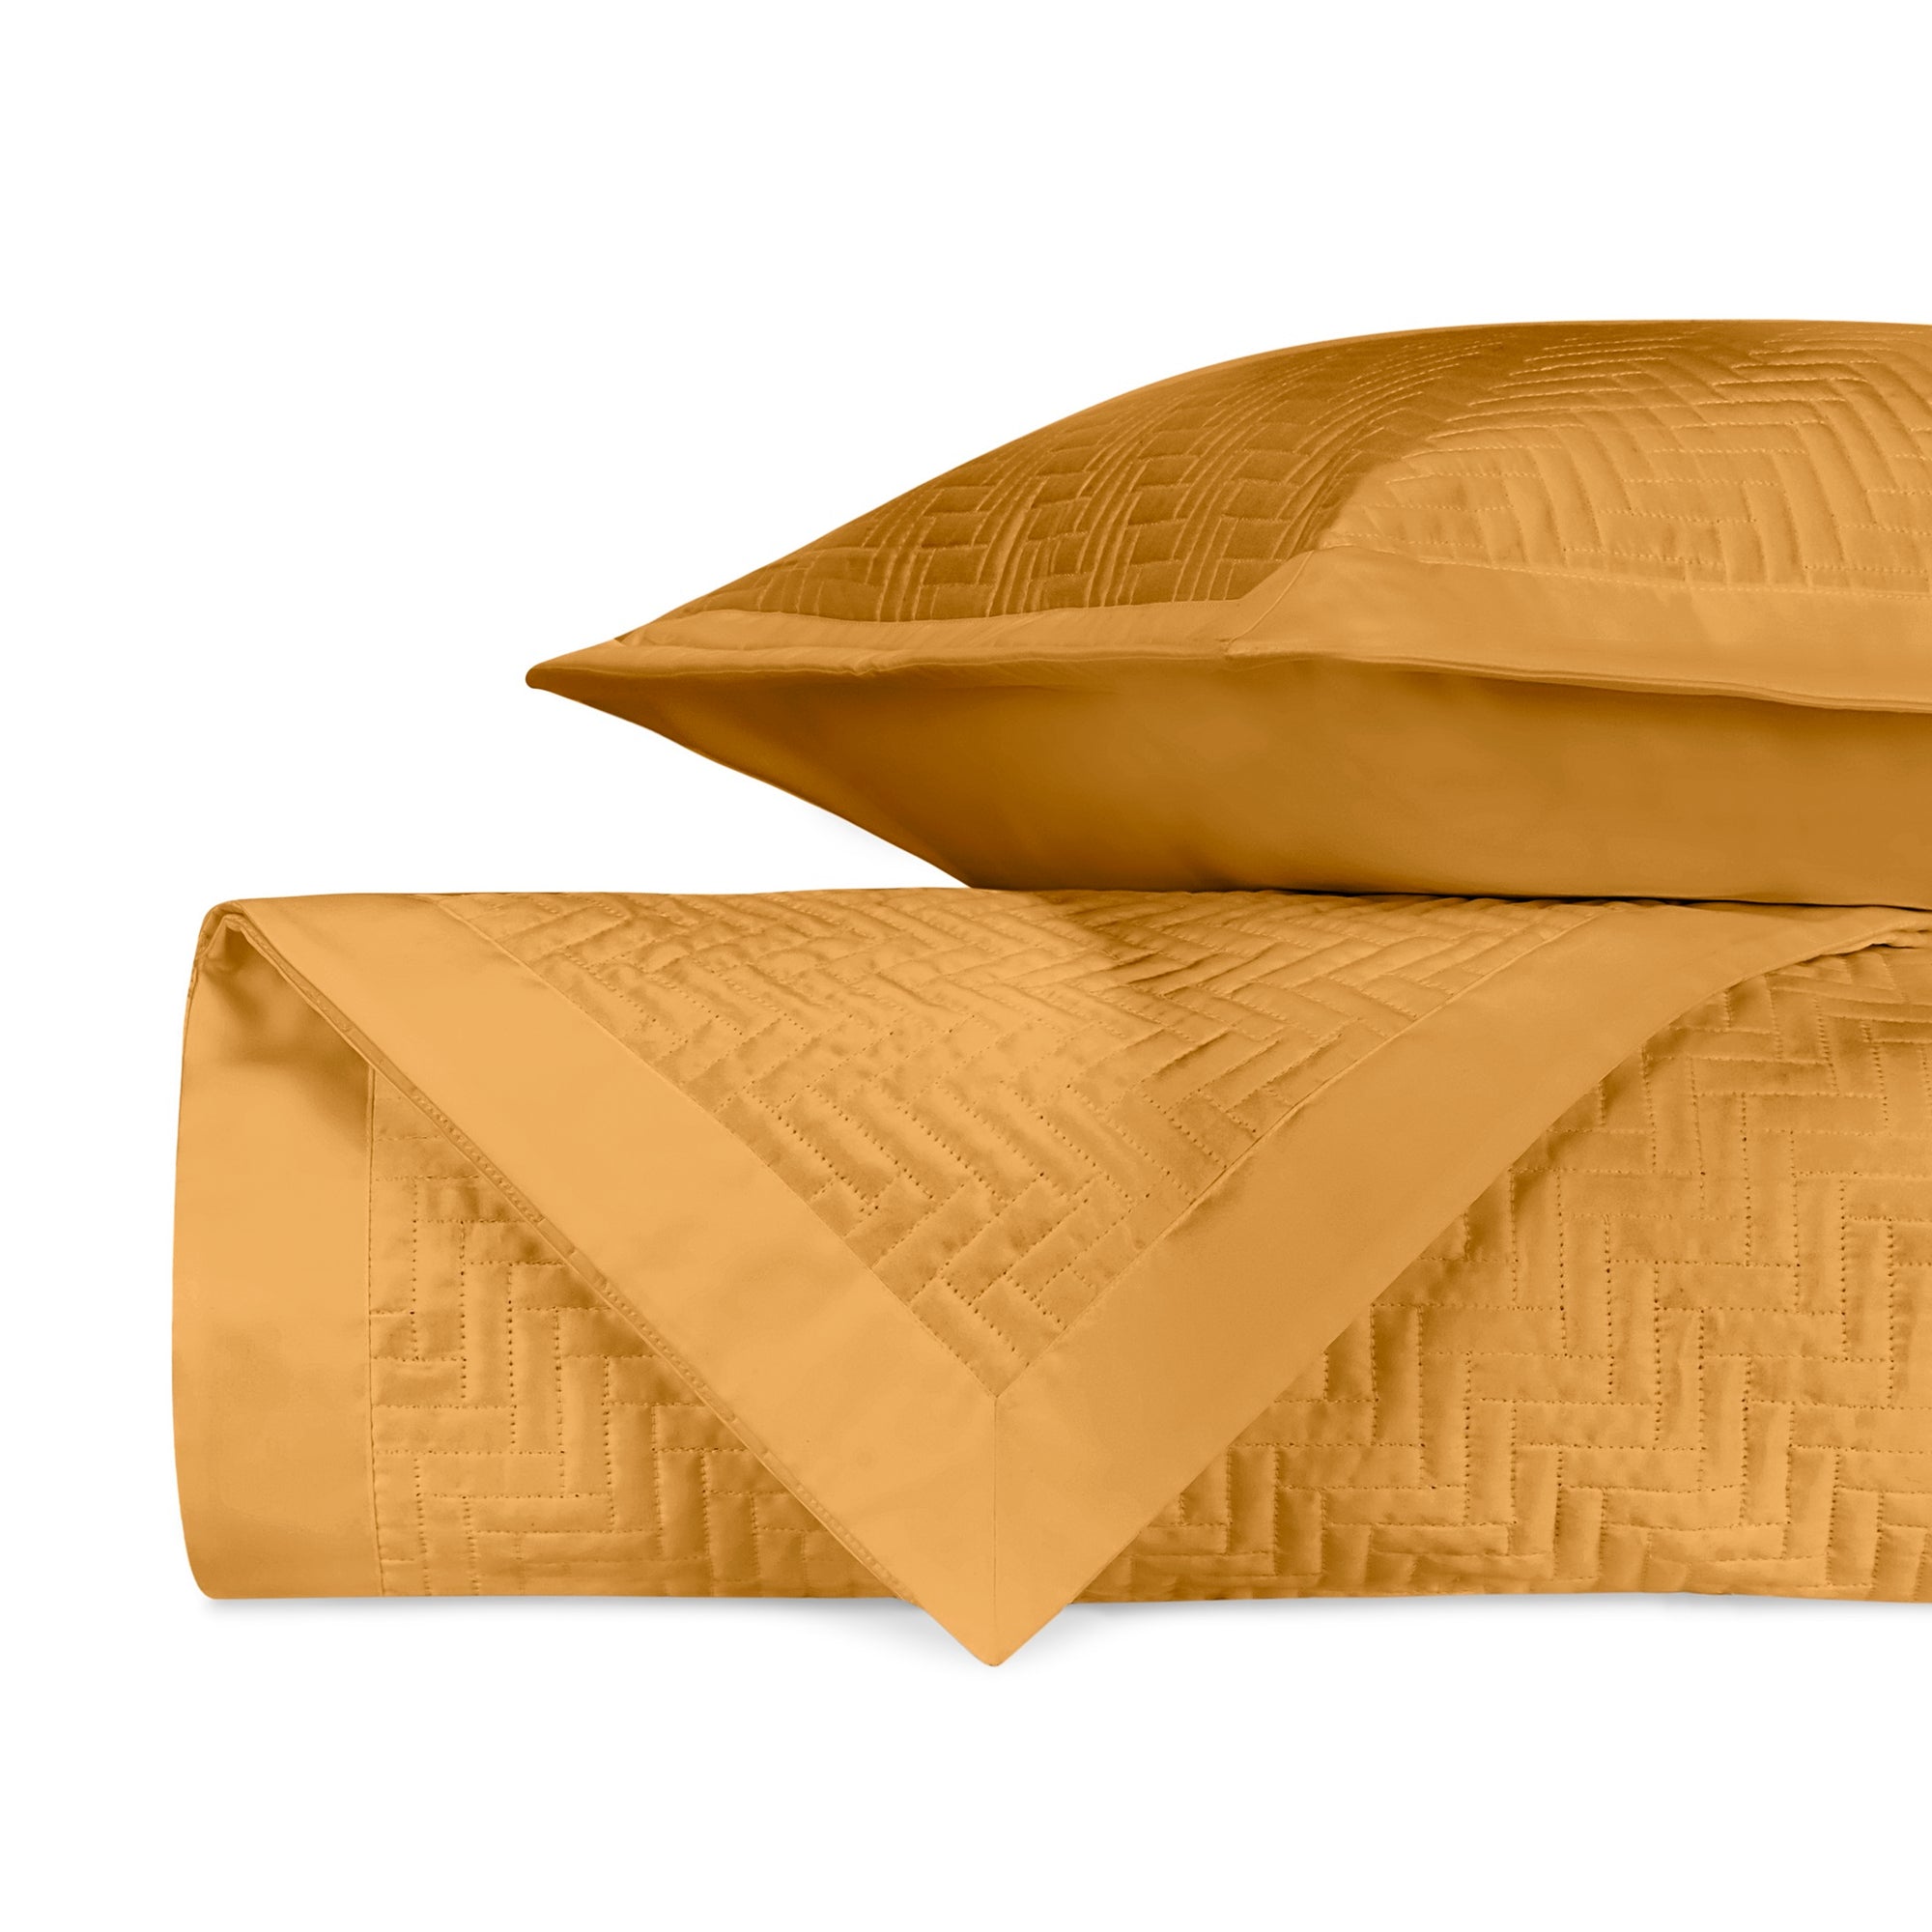 Stack Image of Home Treasures Baxter Royal Sateen Quilted Bedding in Color Marigold